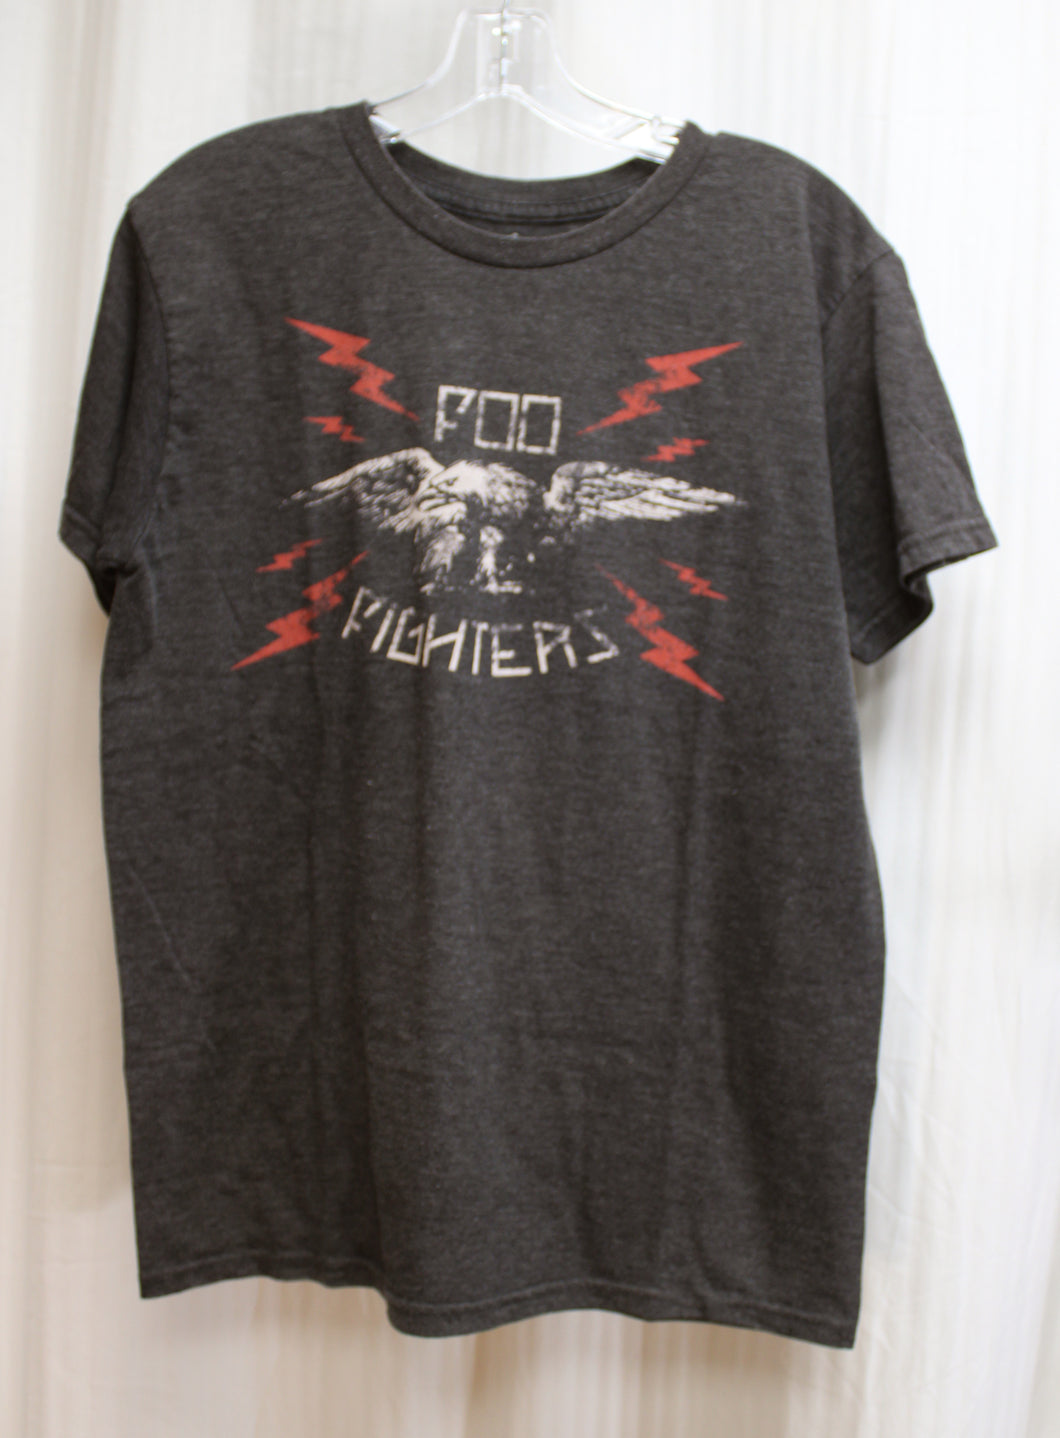 Foo Fighters - Electric Eagle - Black Heathered T-Shirt (Six Fifty One) - Size M